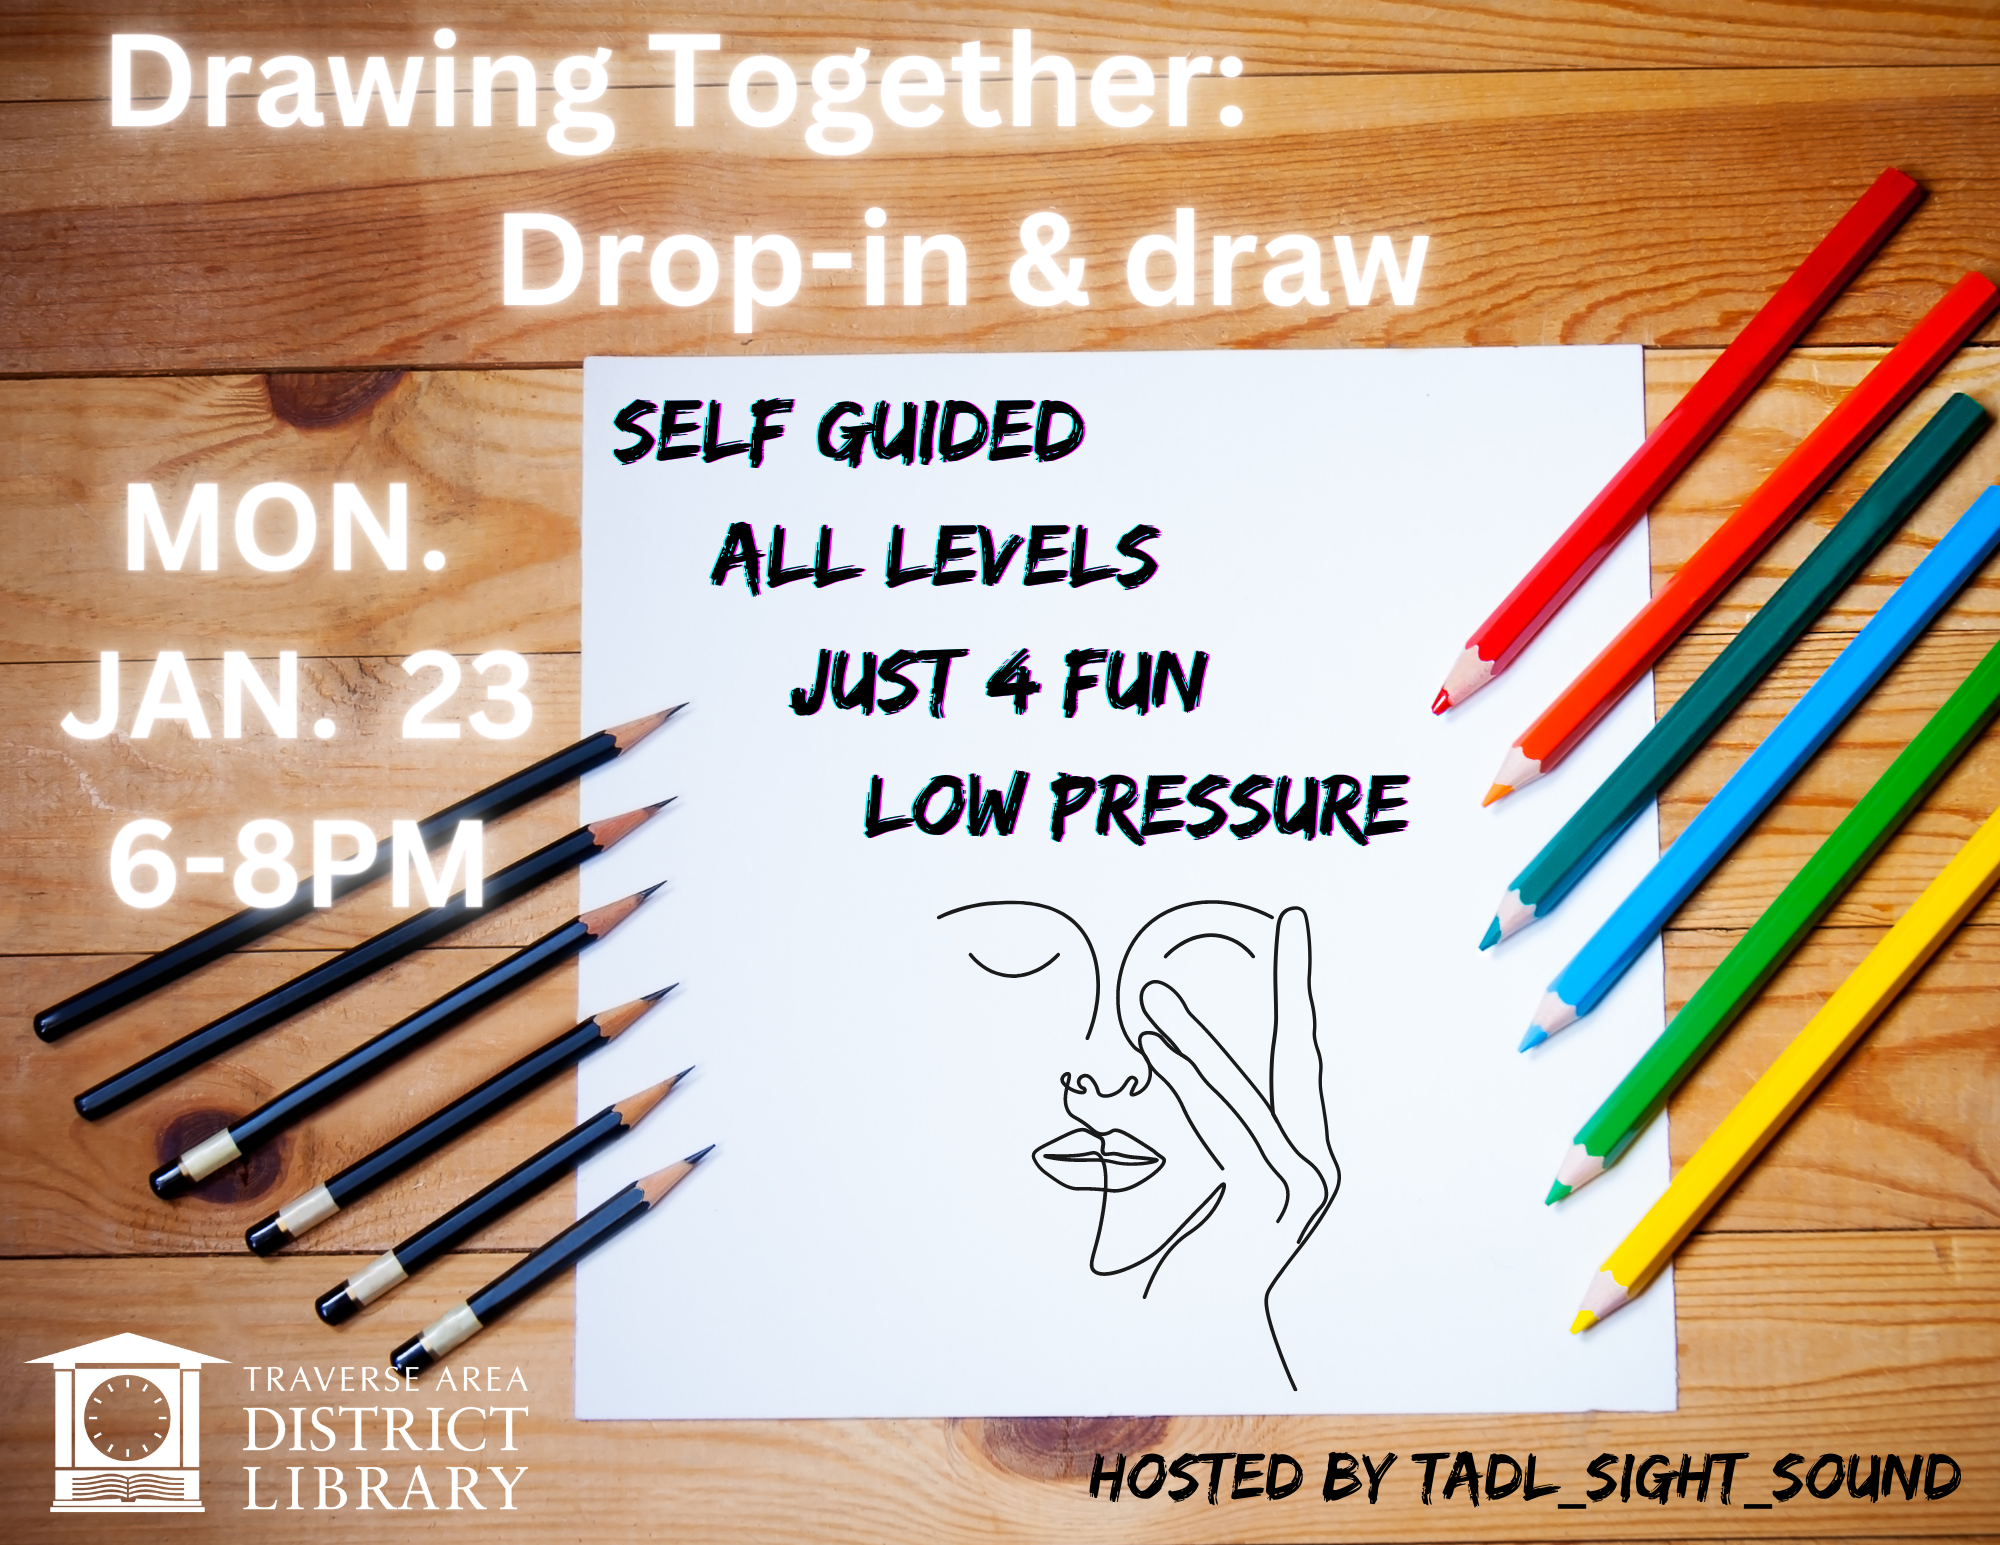 Drawing Together flyer